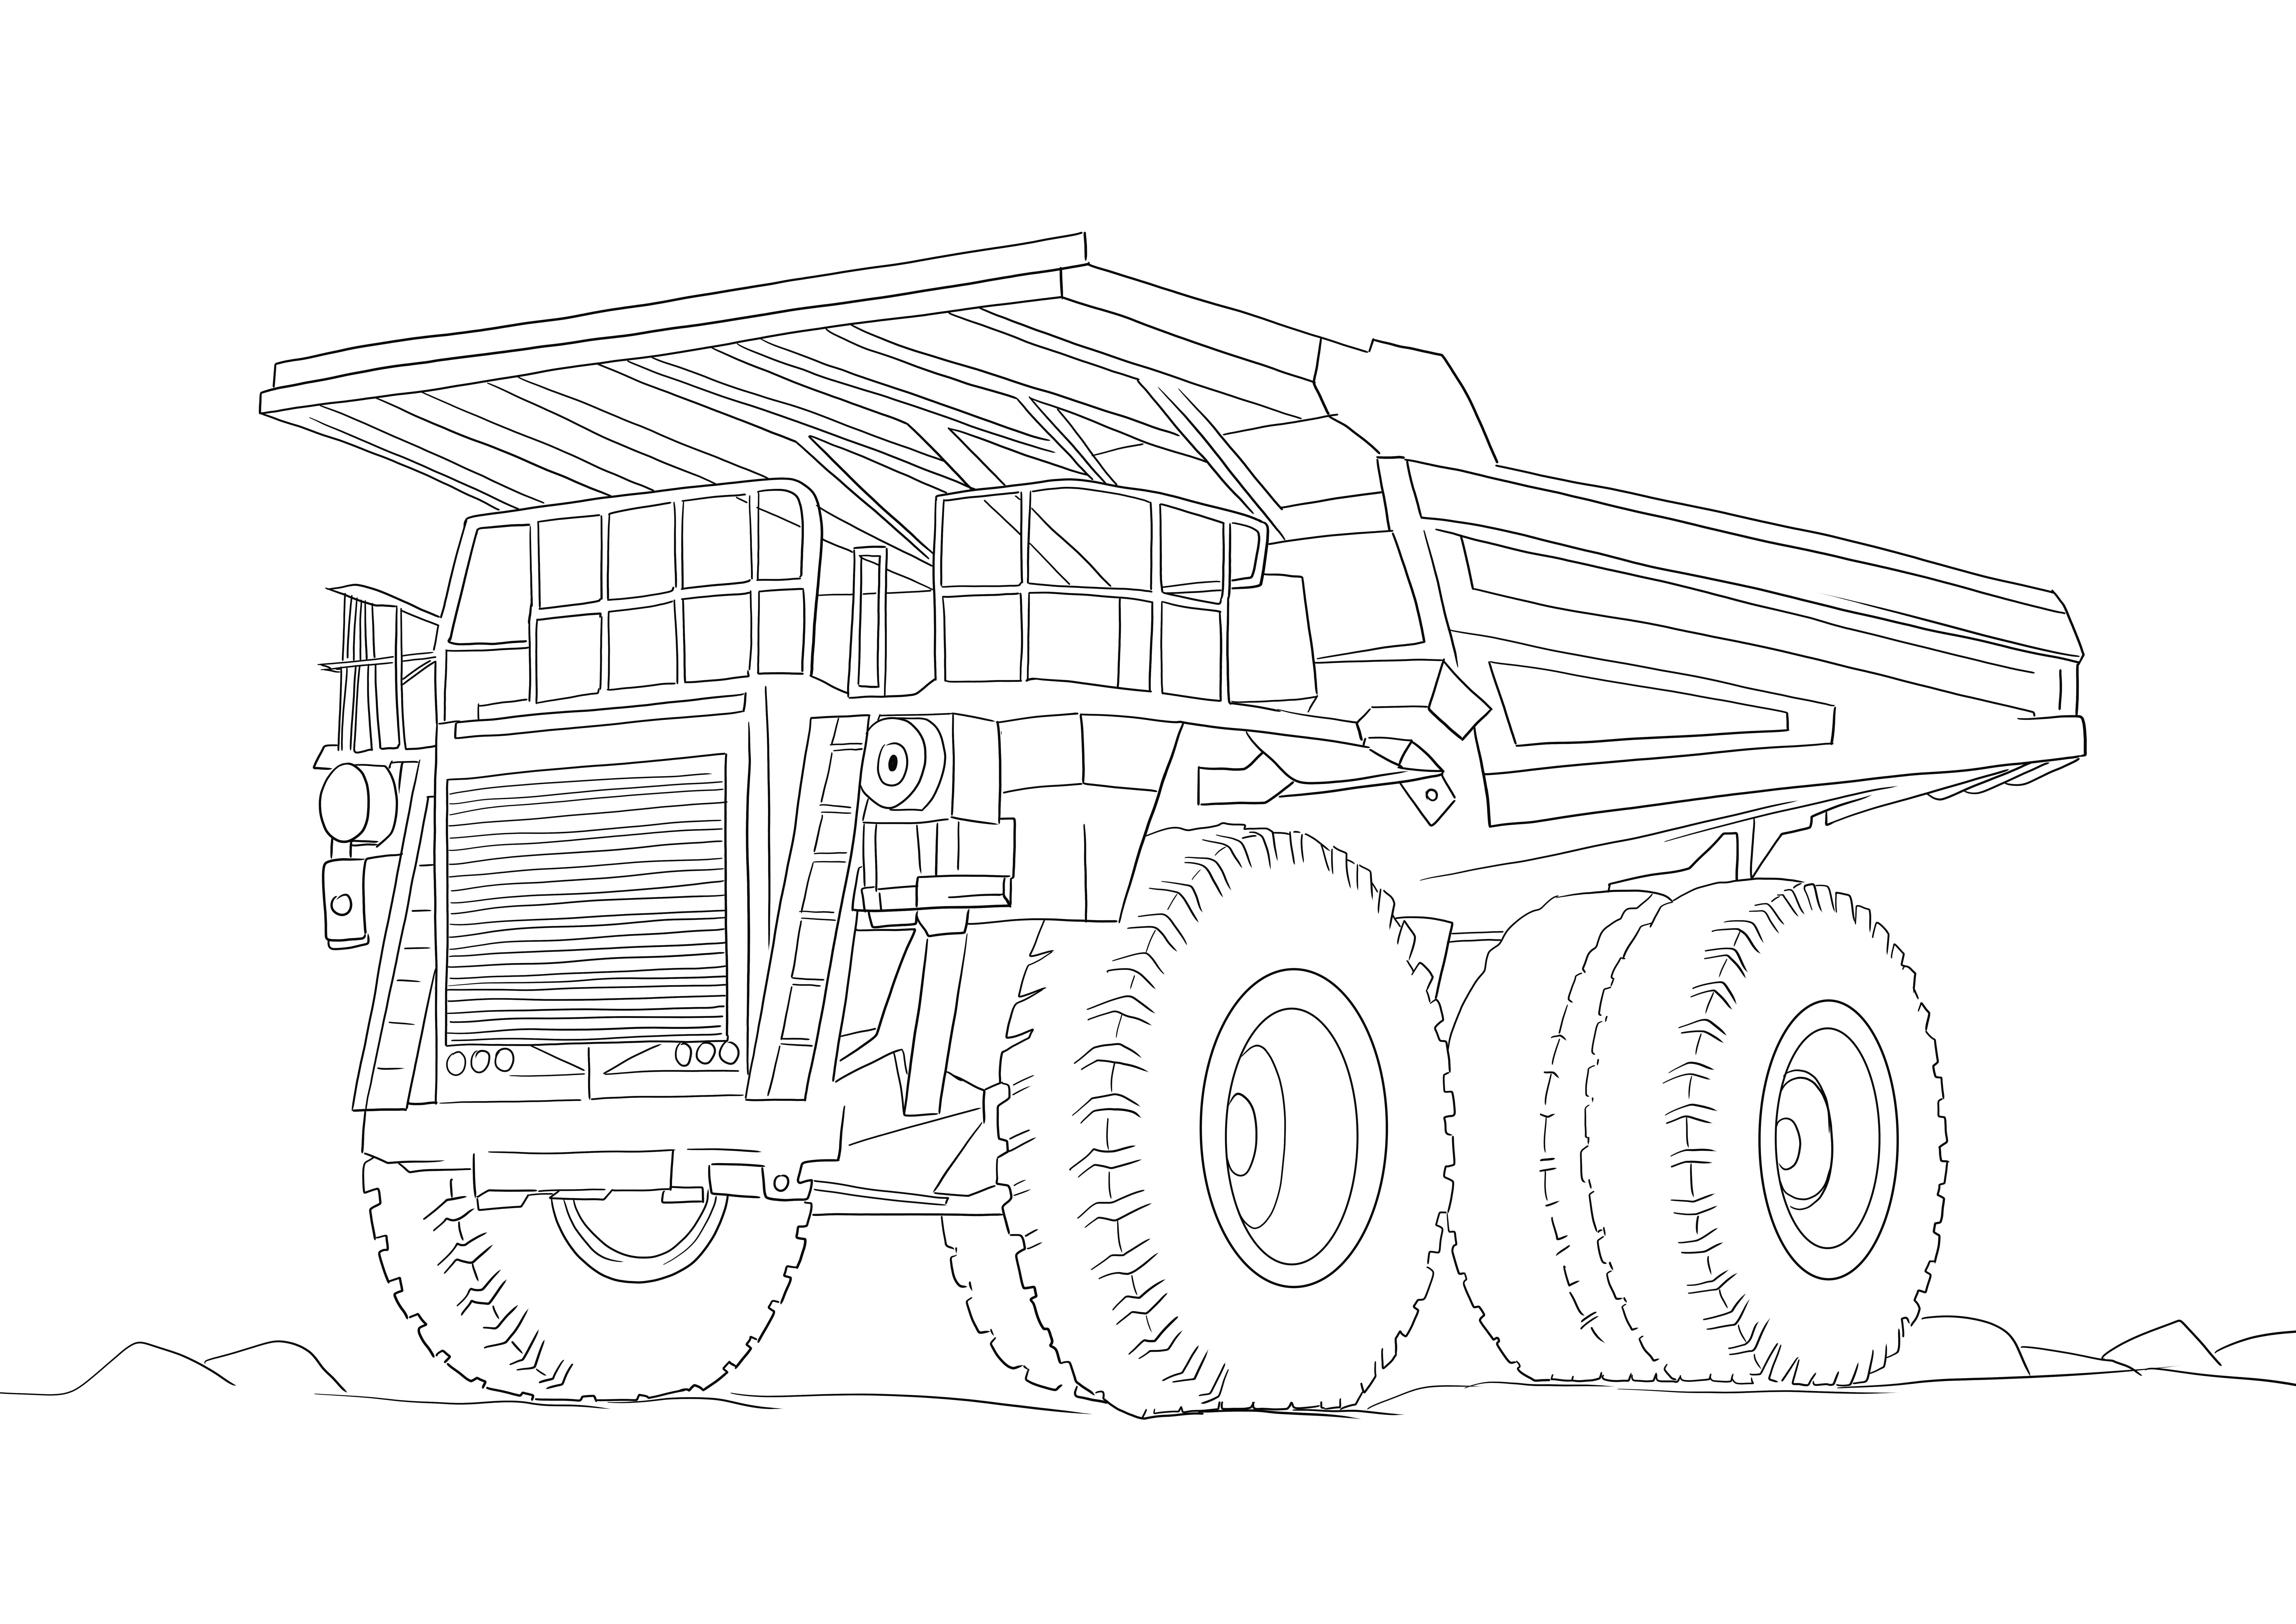 Dump truck free to print or download and even save for later to color